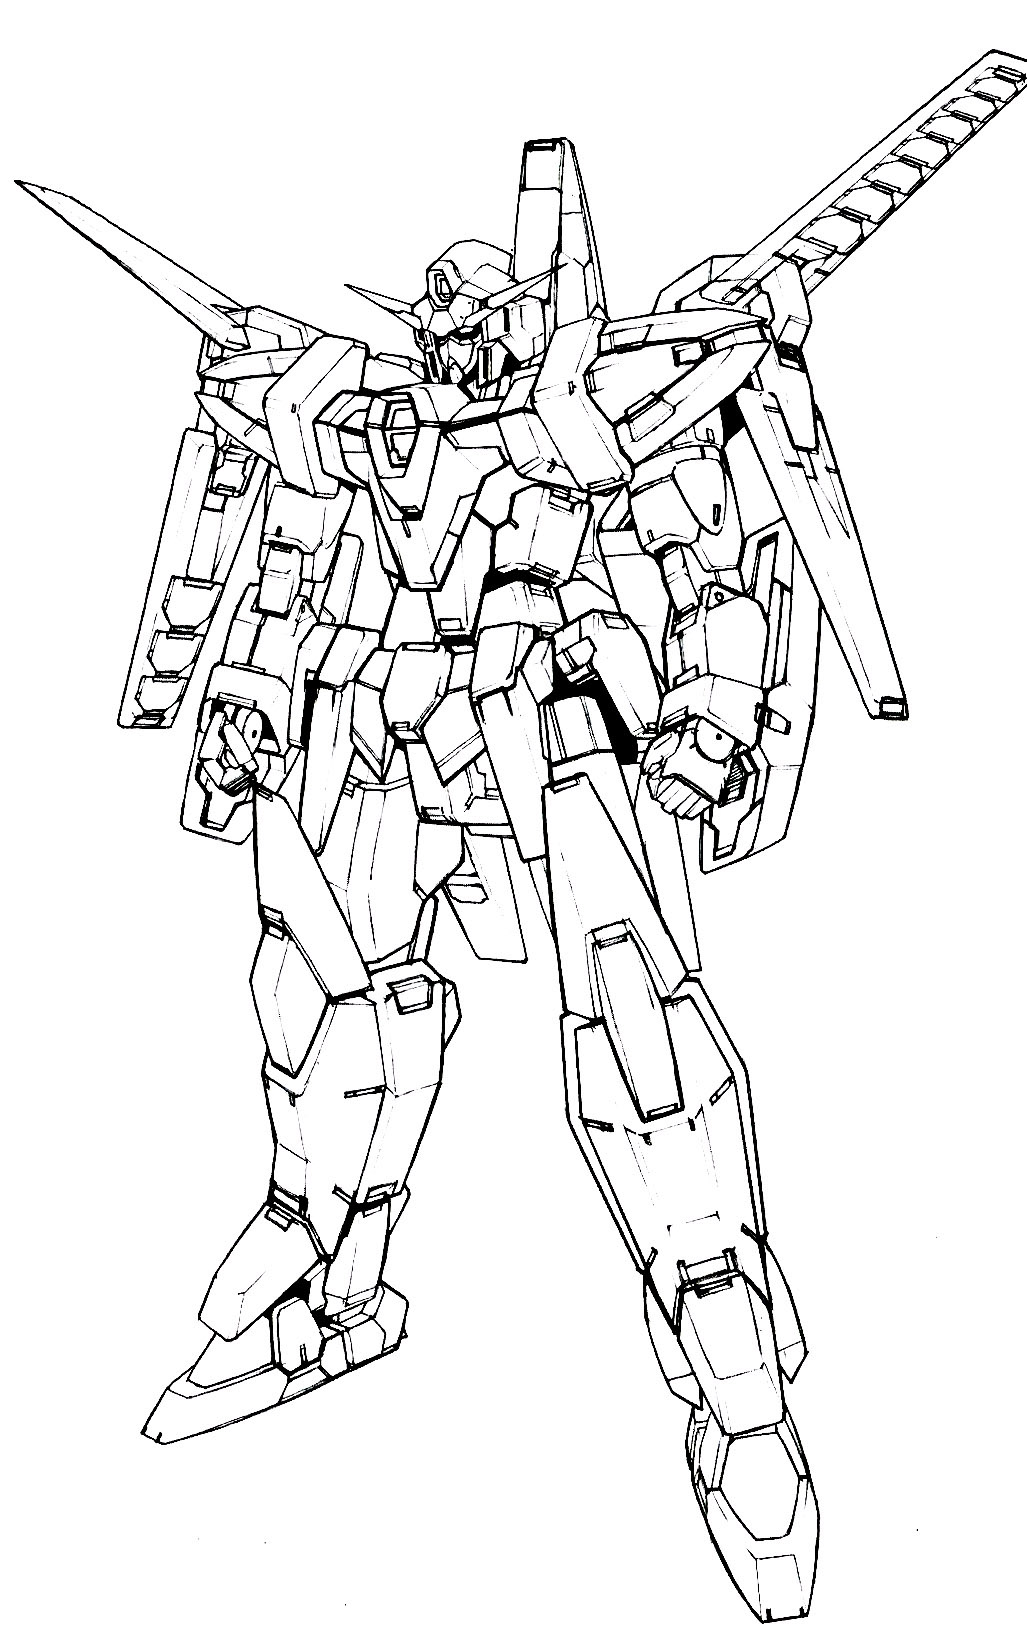 Gundam Coloring Pages